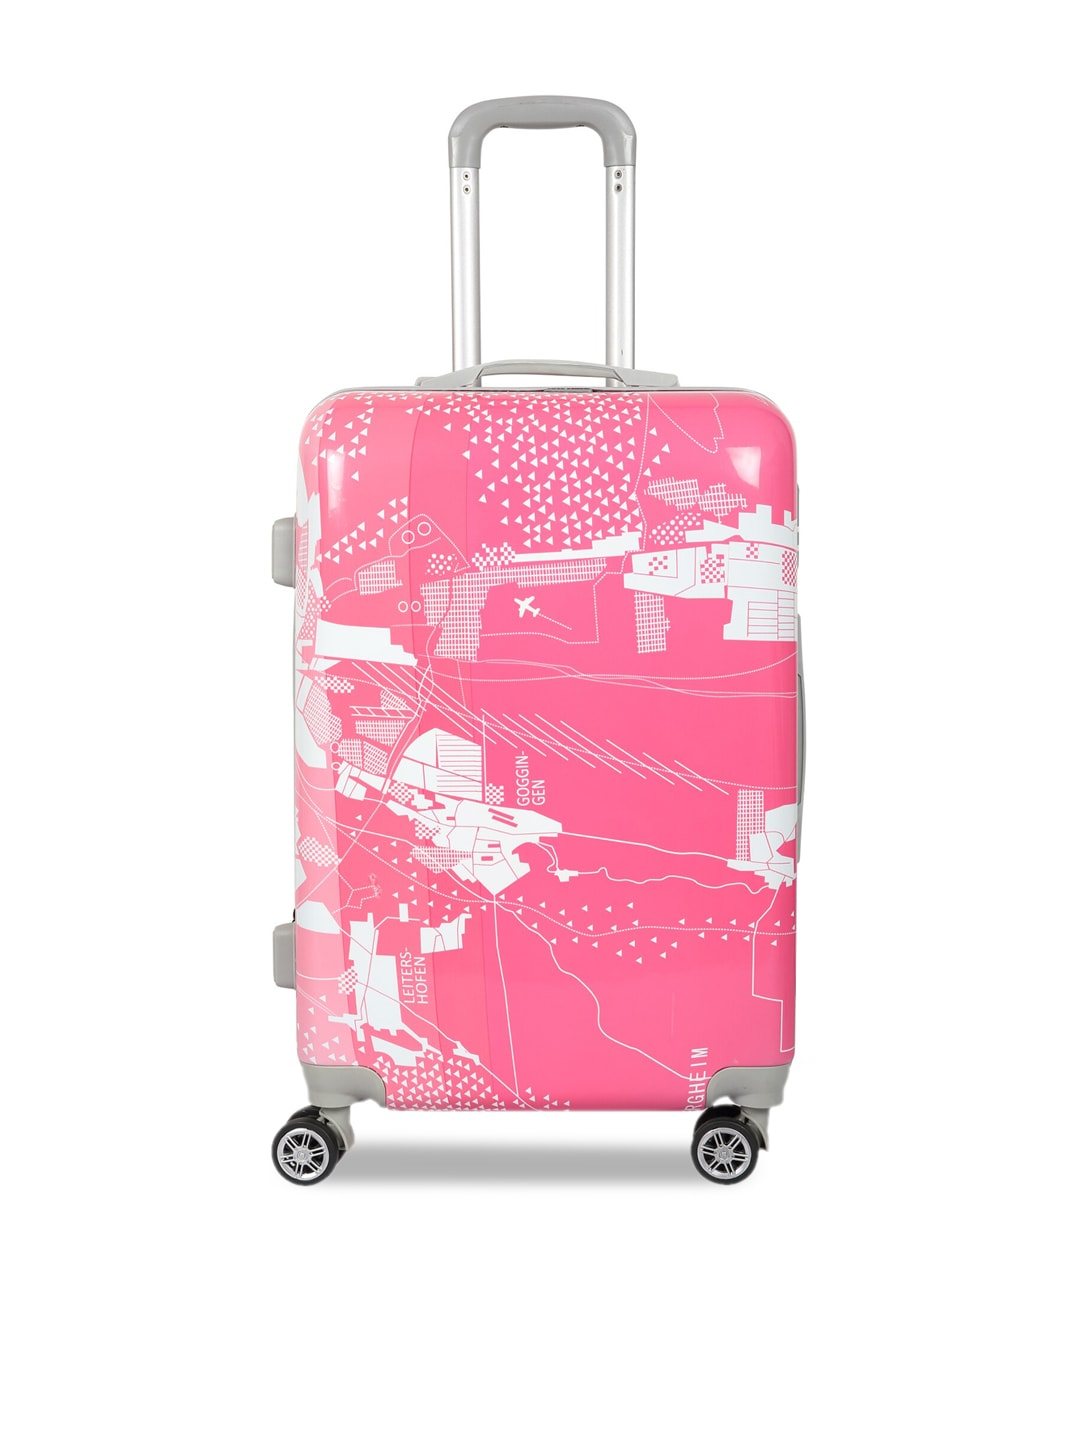 Polo Class Pink & White Printed Hard-Sided Large Trolley Suitcase Price in India